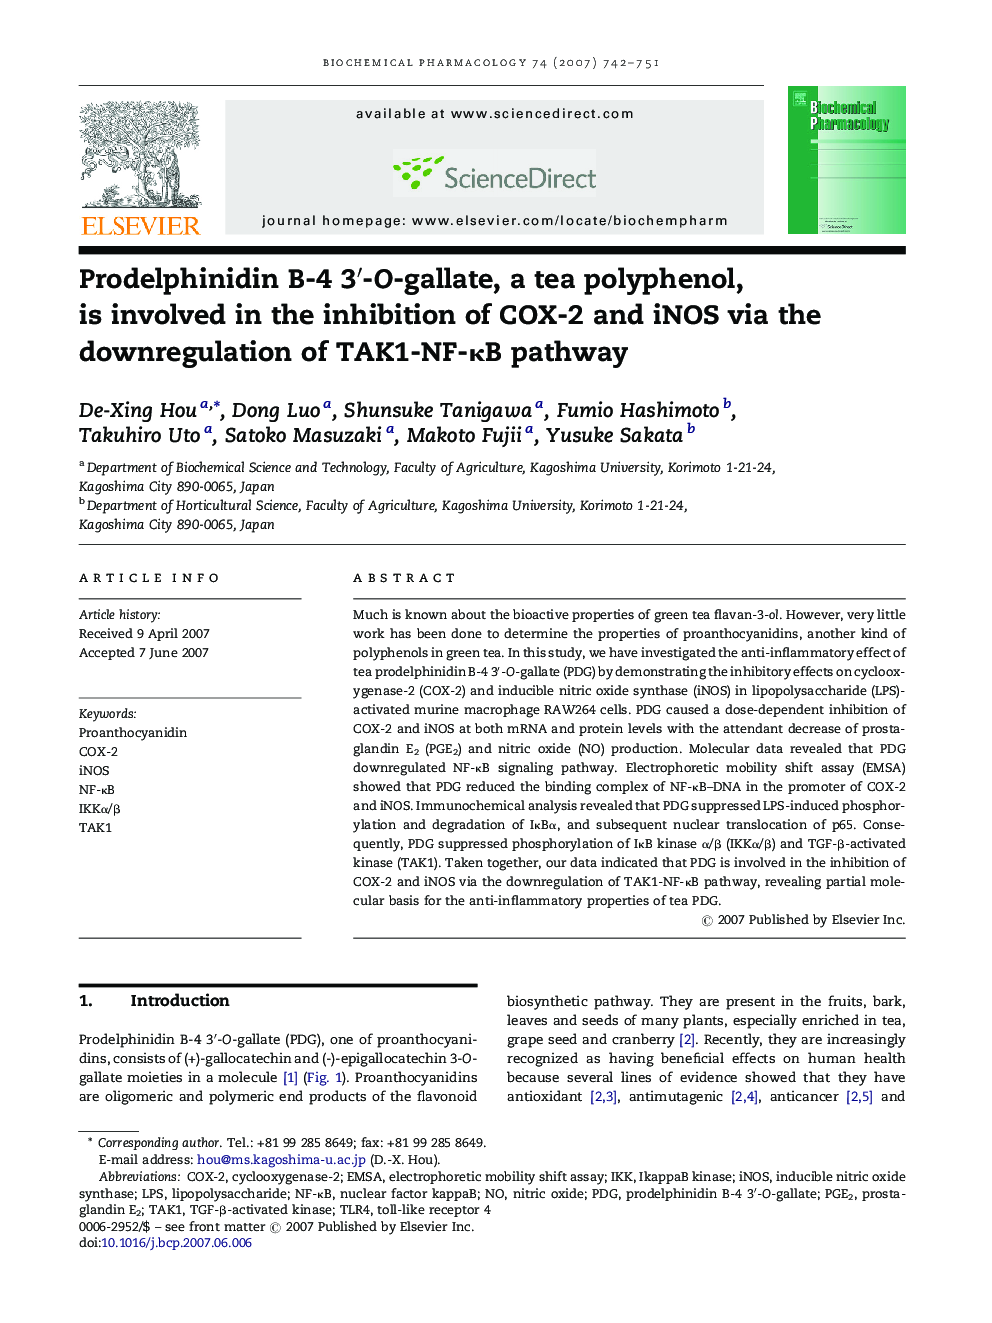 Prodelphinidin B-4 3′-O-gallate, a tea polyphenol, is involved in the inhibition of COX-2 and iNOS via the downregulation of TAK1-NF-κB pathway